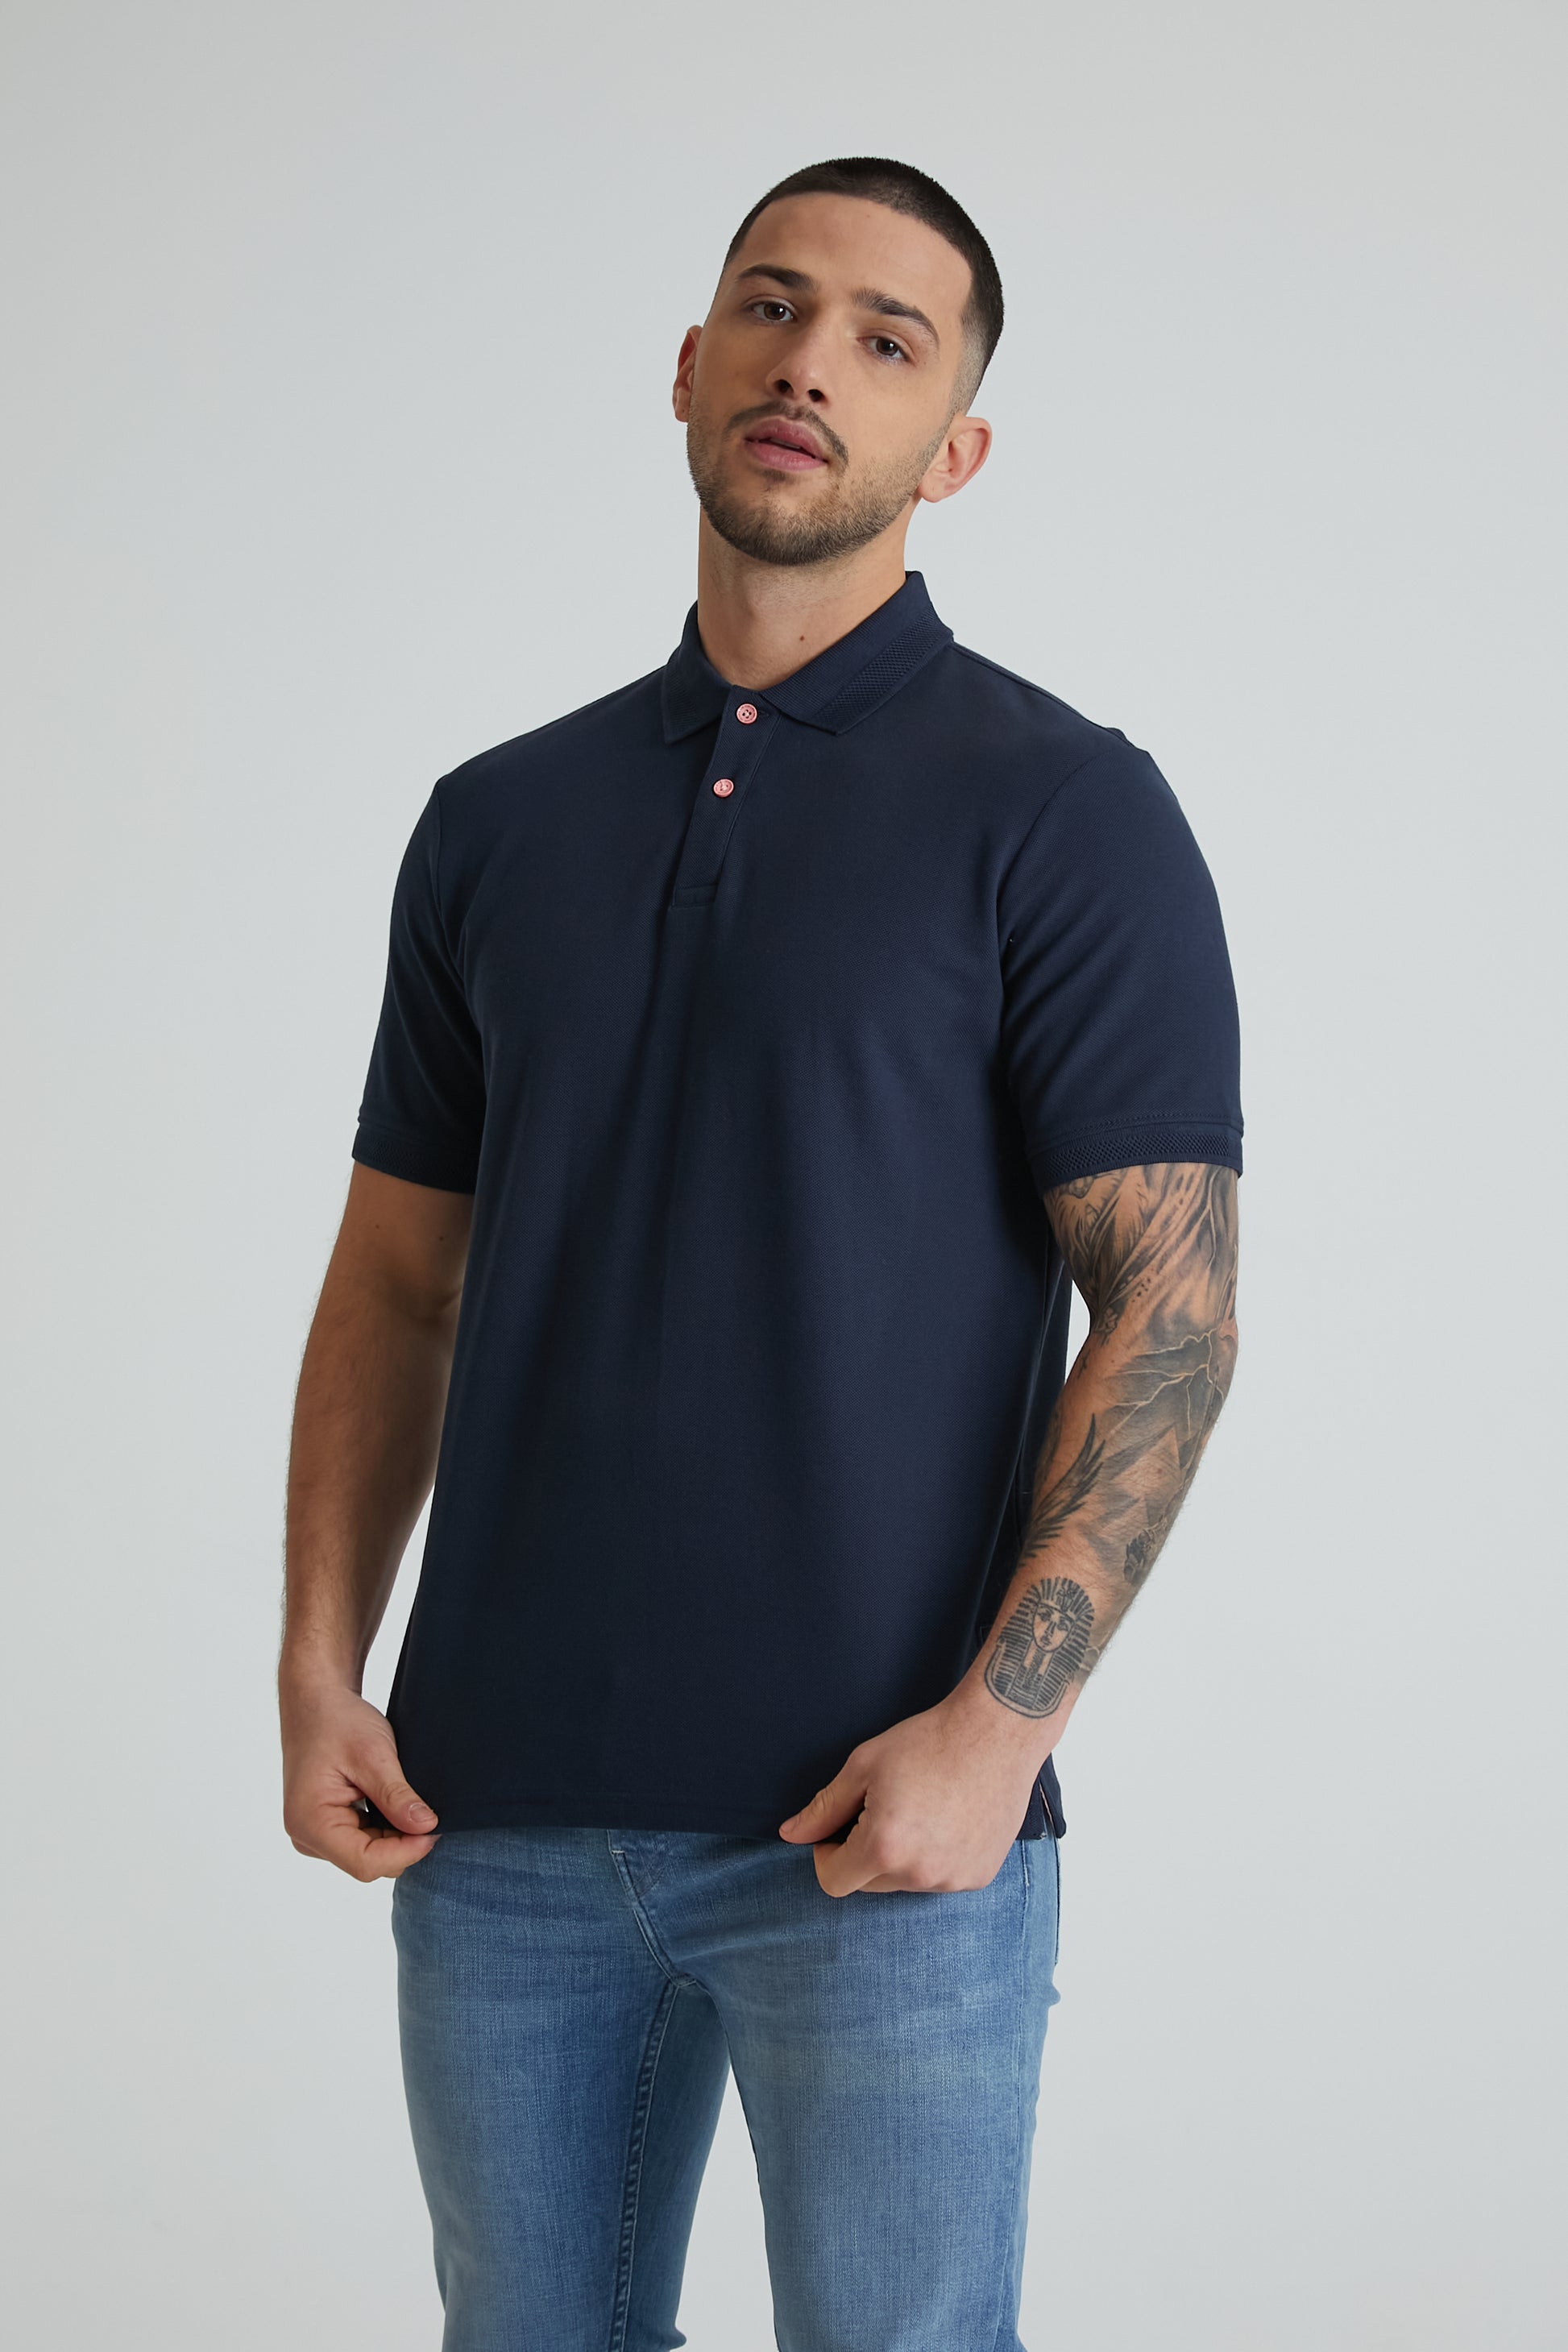 KUGA honeycomb pique polo in NAVY - DML Jeans 